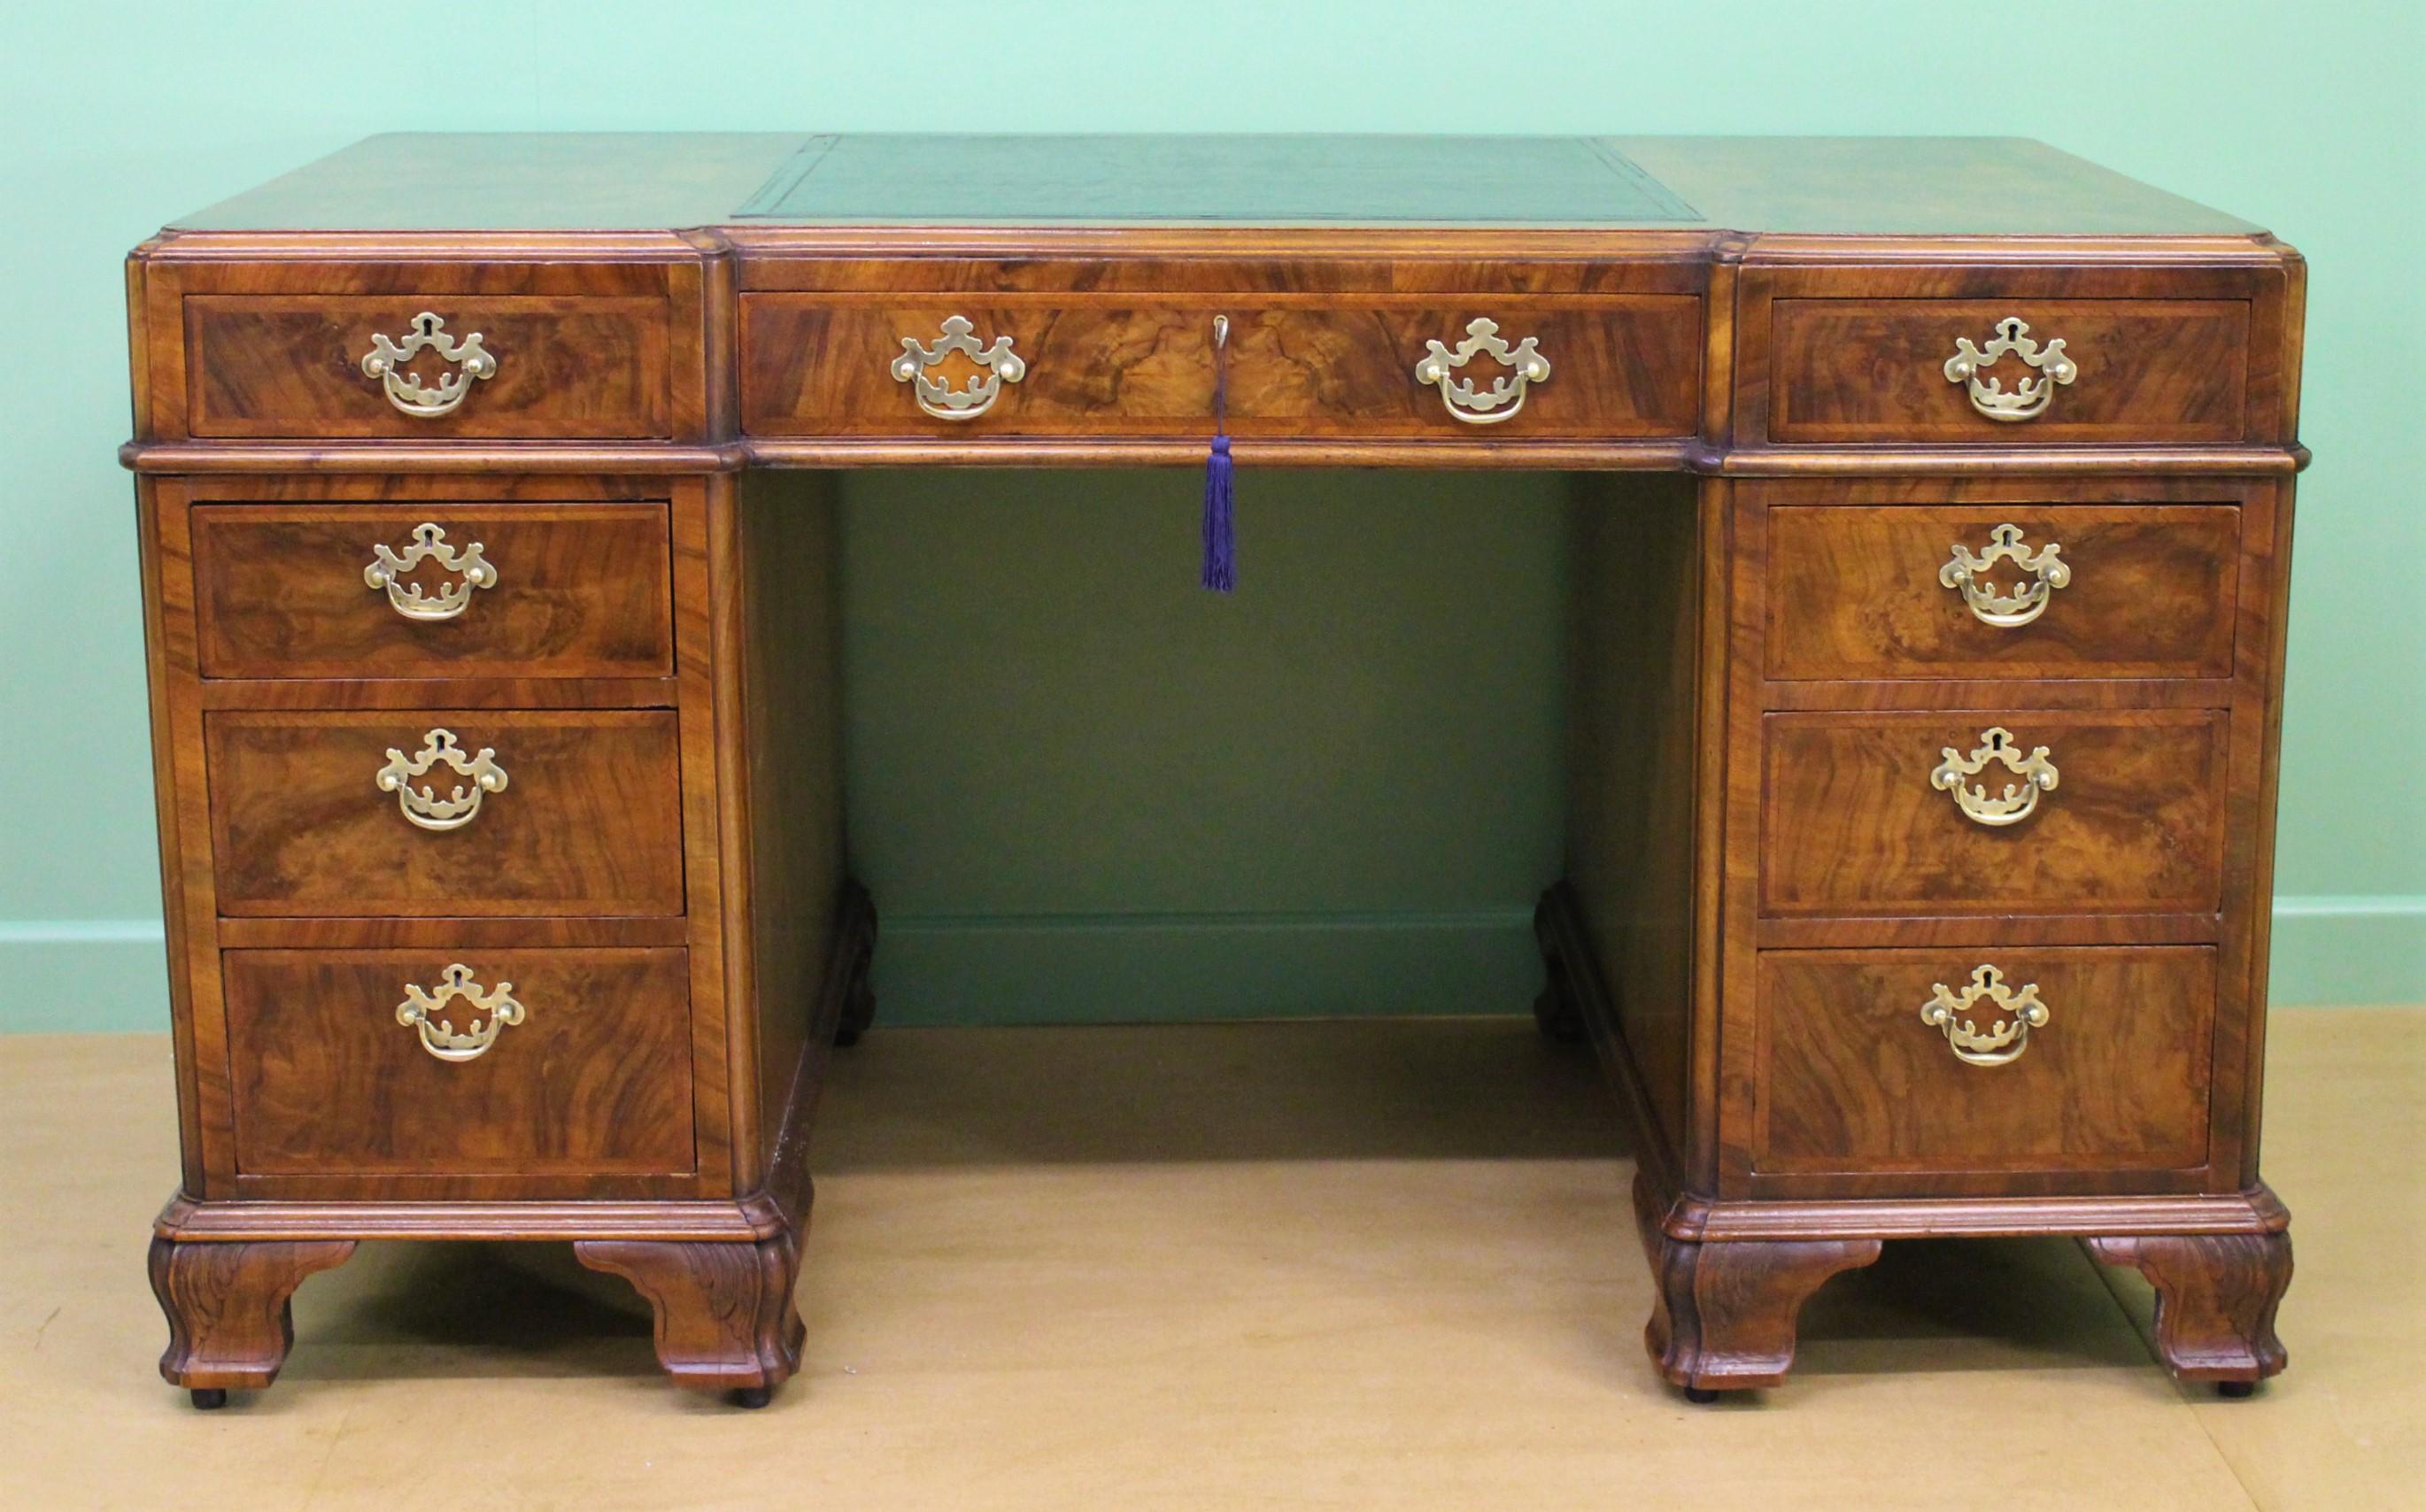 A superb quality burr walnut pedestal desk by the prestigious firm of Maple and Co. of excellent construction in solid walnut, with stunning burr walnut veneers and oak lined drawers. There is an arrangement of 8 short and one long, central, drawer